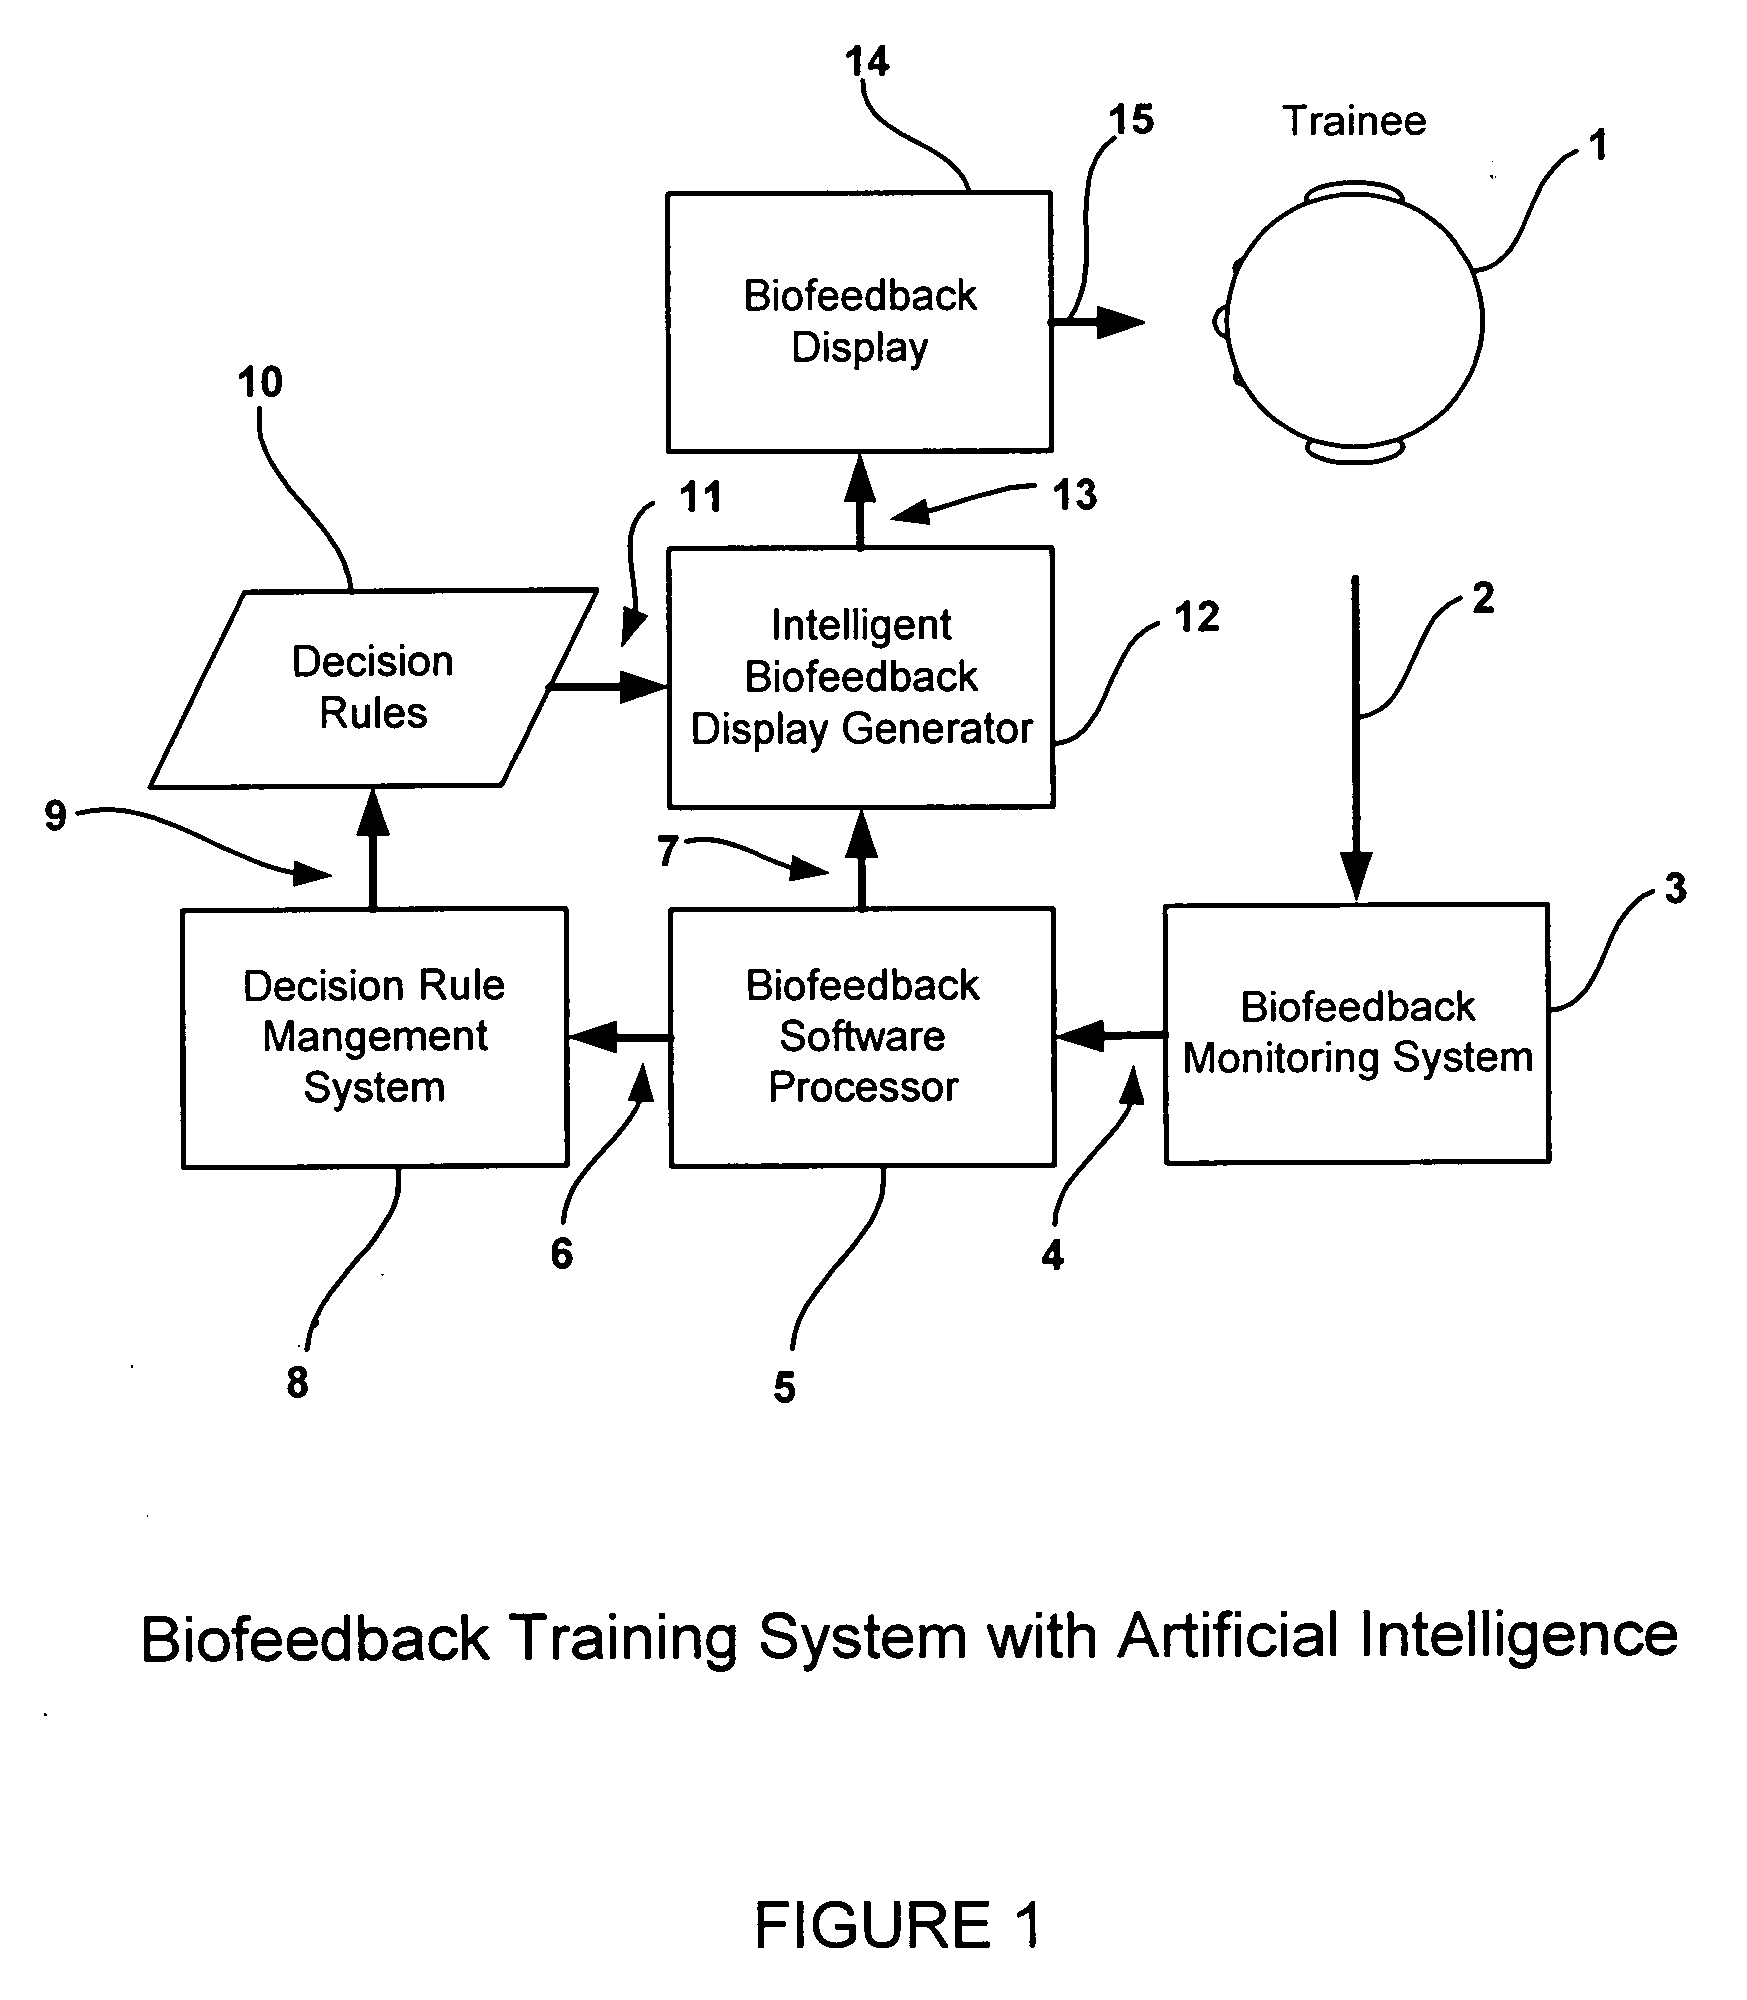 System and method for incorporating artificial intelligence into a biofeedback training system